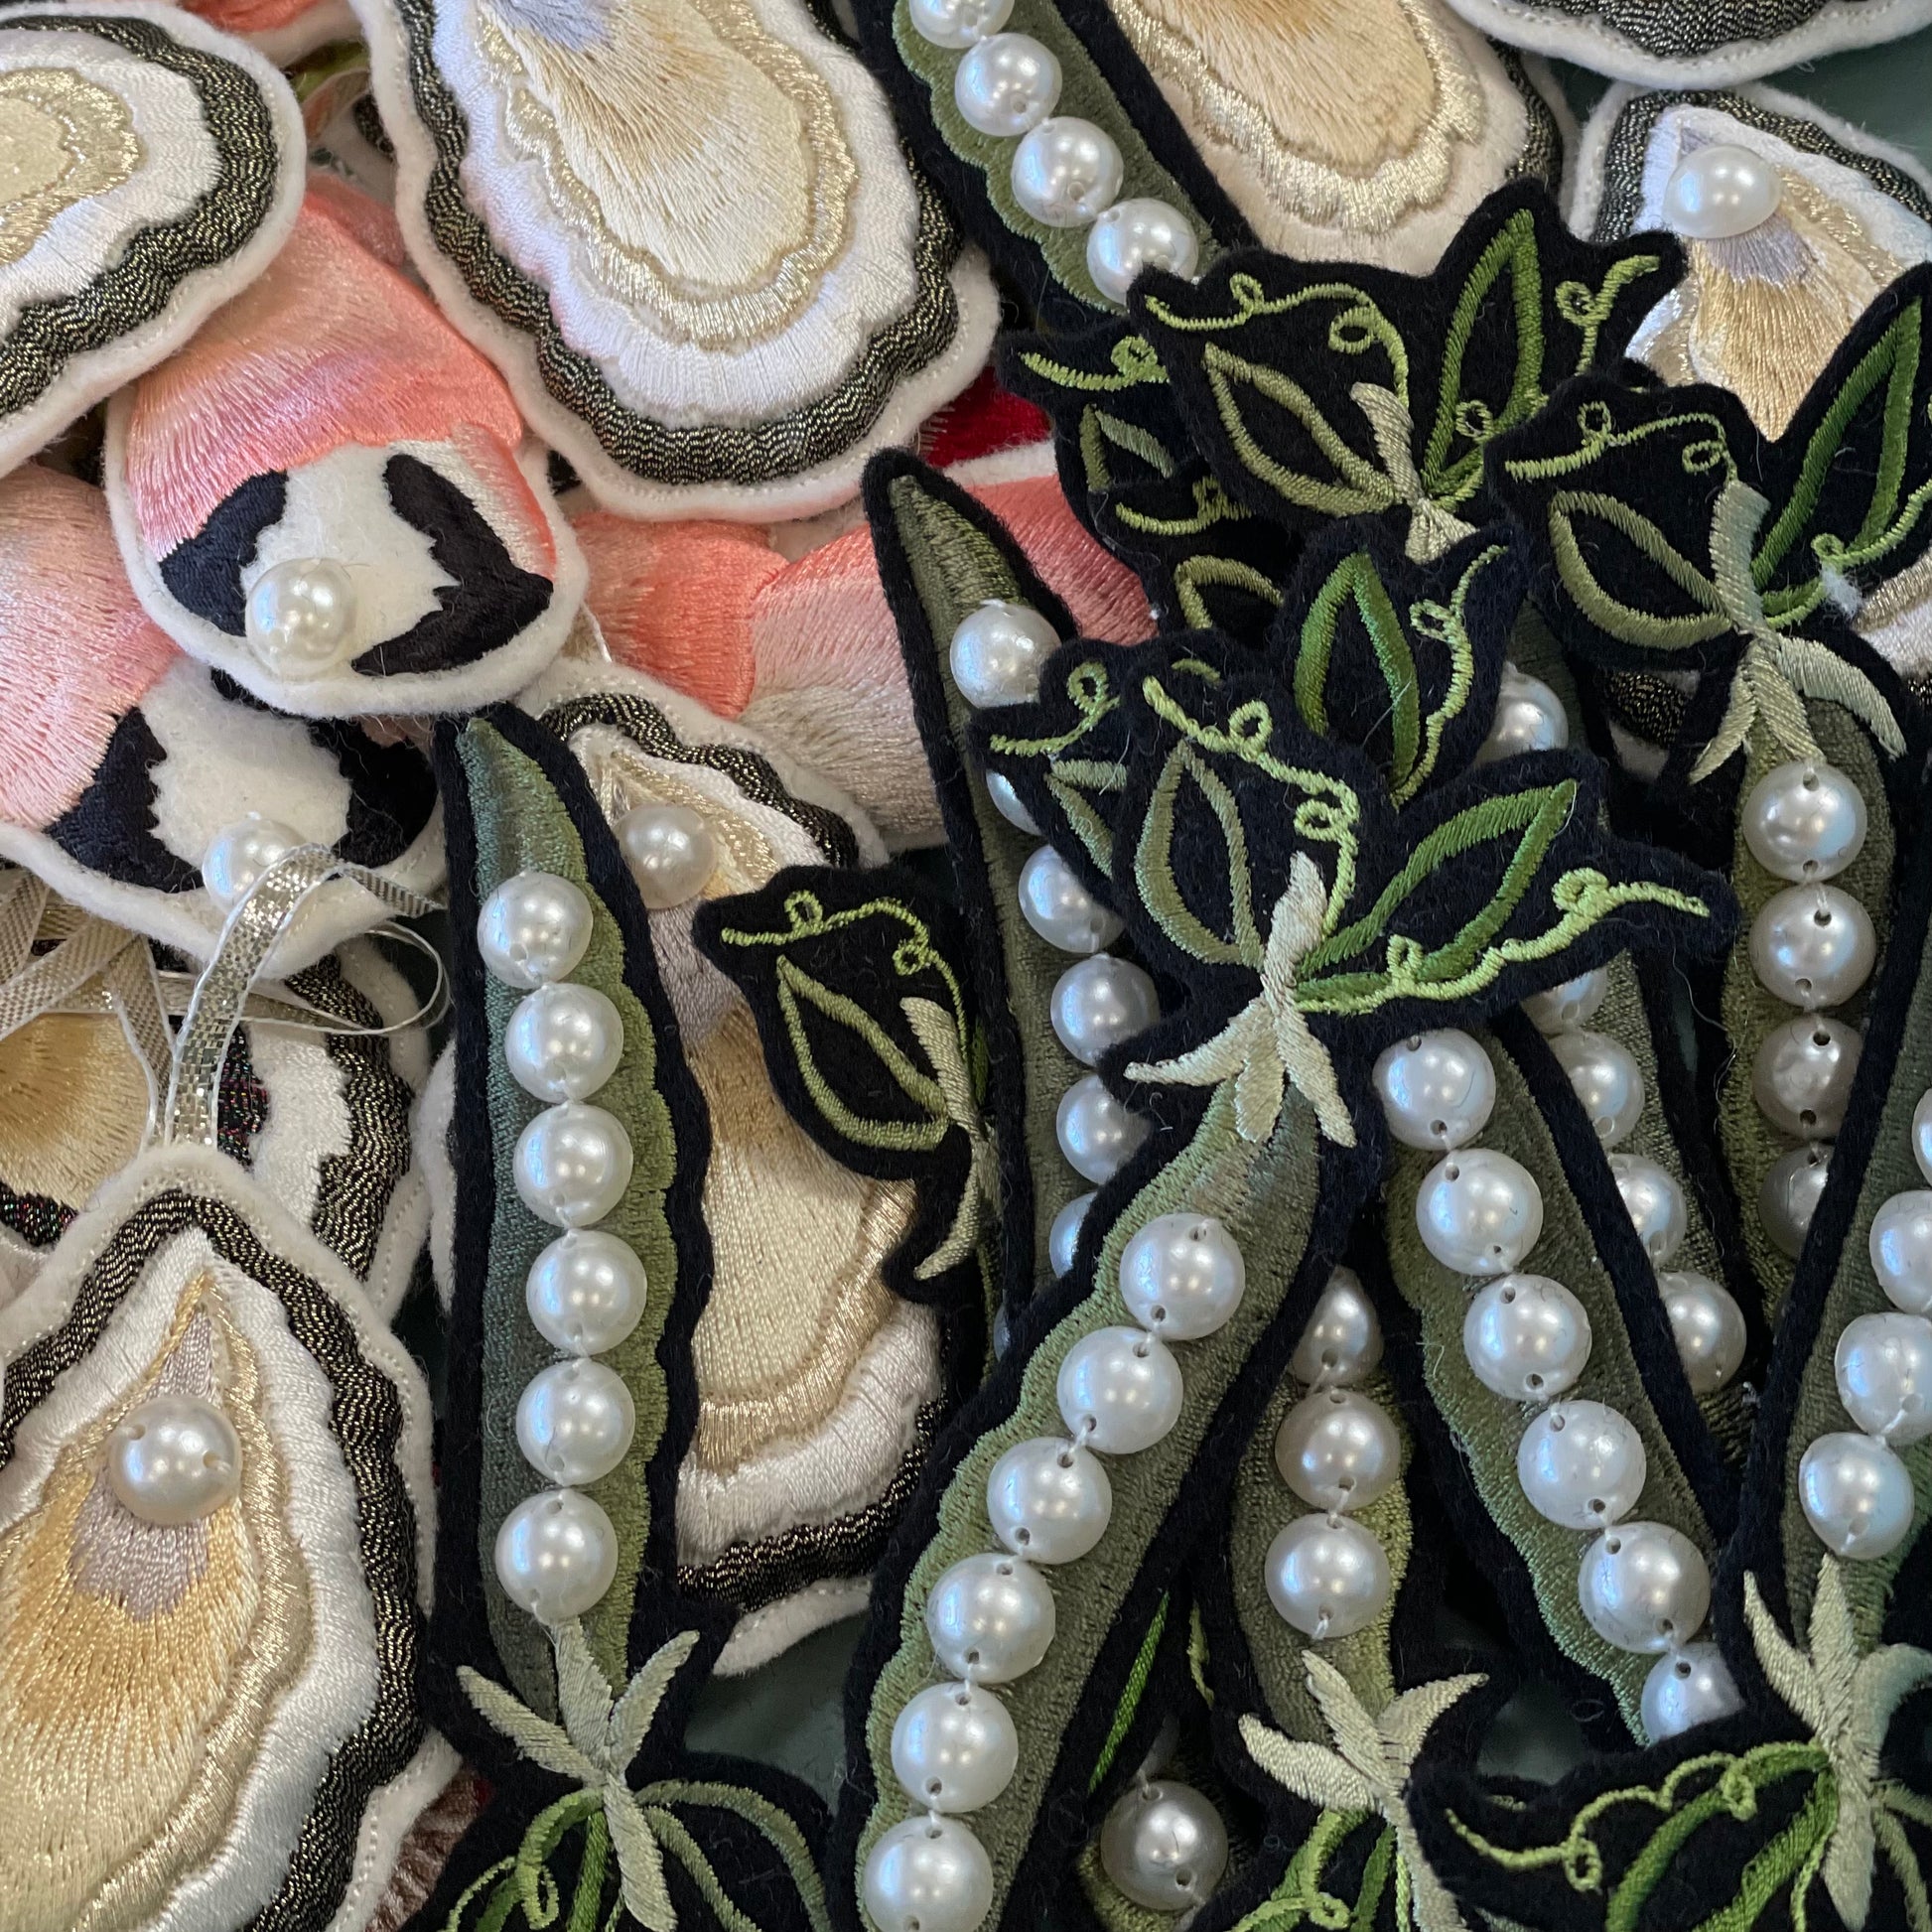 A selection of Ellie Mac embroidered patches. Embroidered crab claws and oysters can be seen in the background with the embroidered peas on top